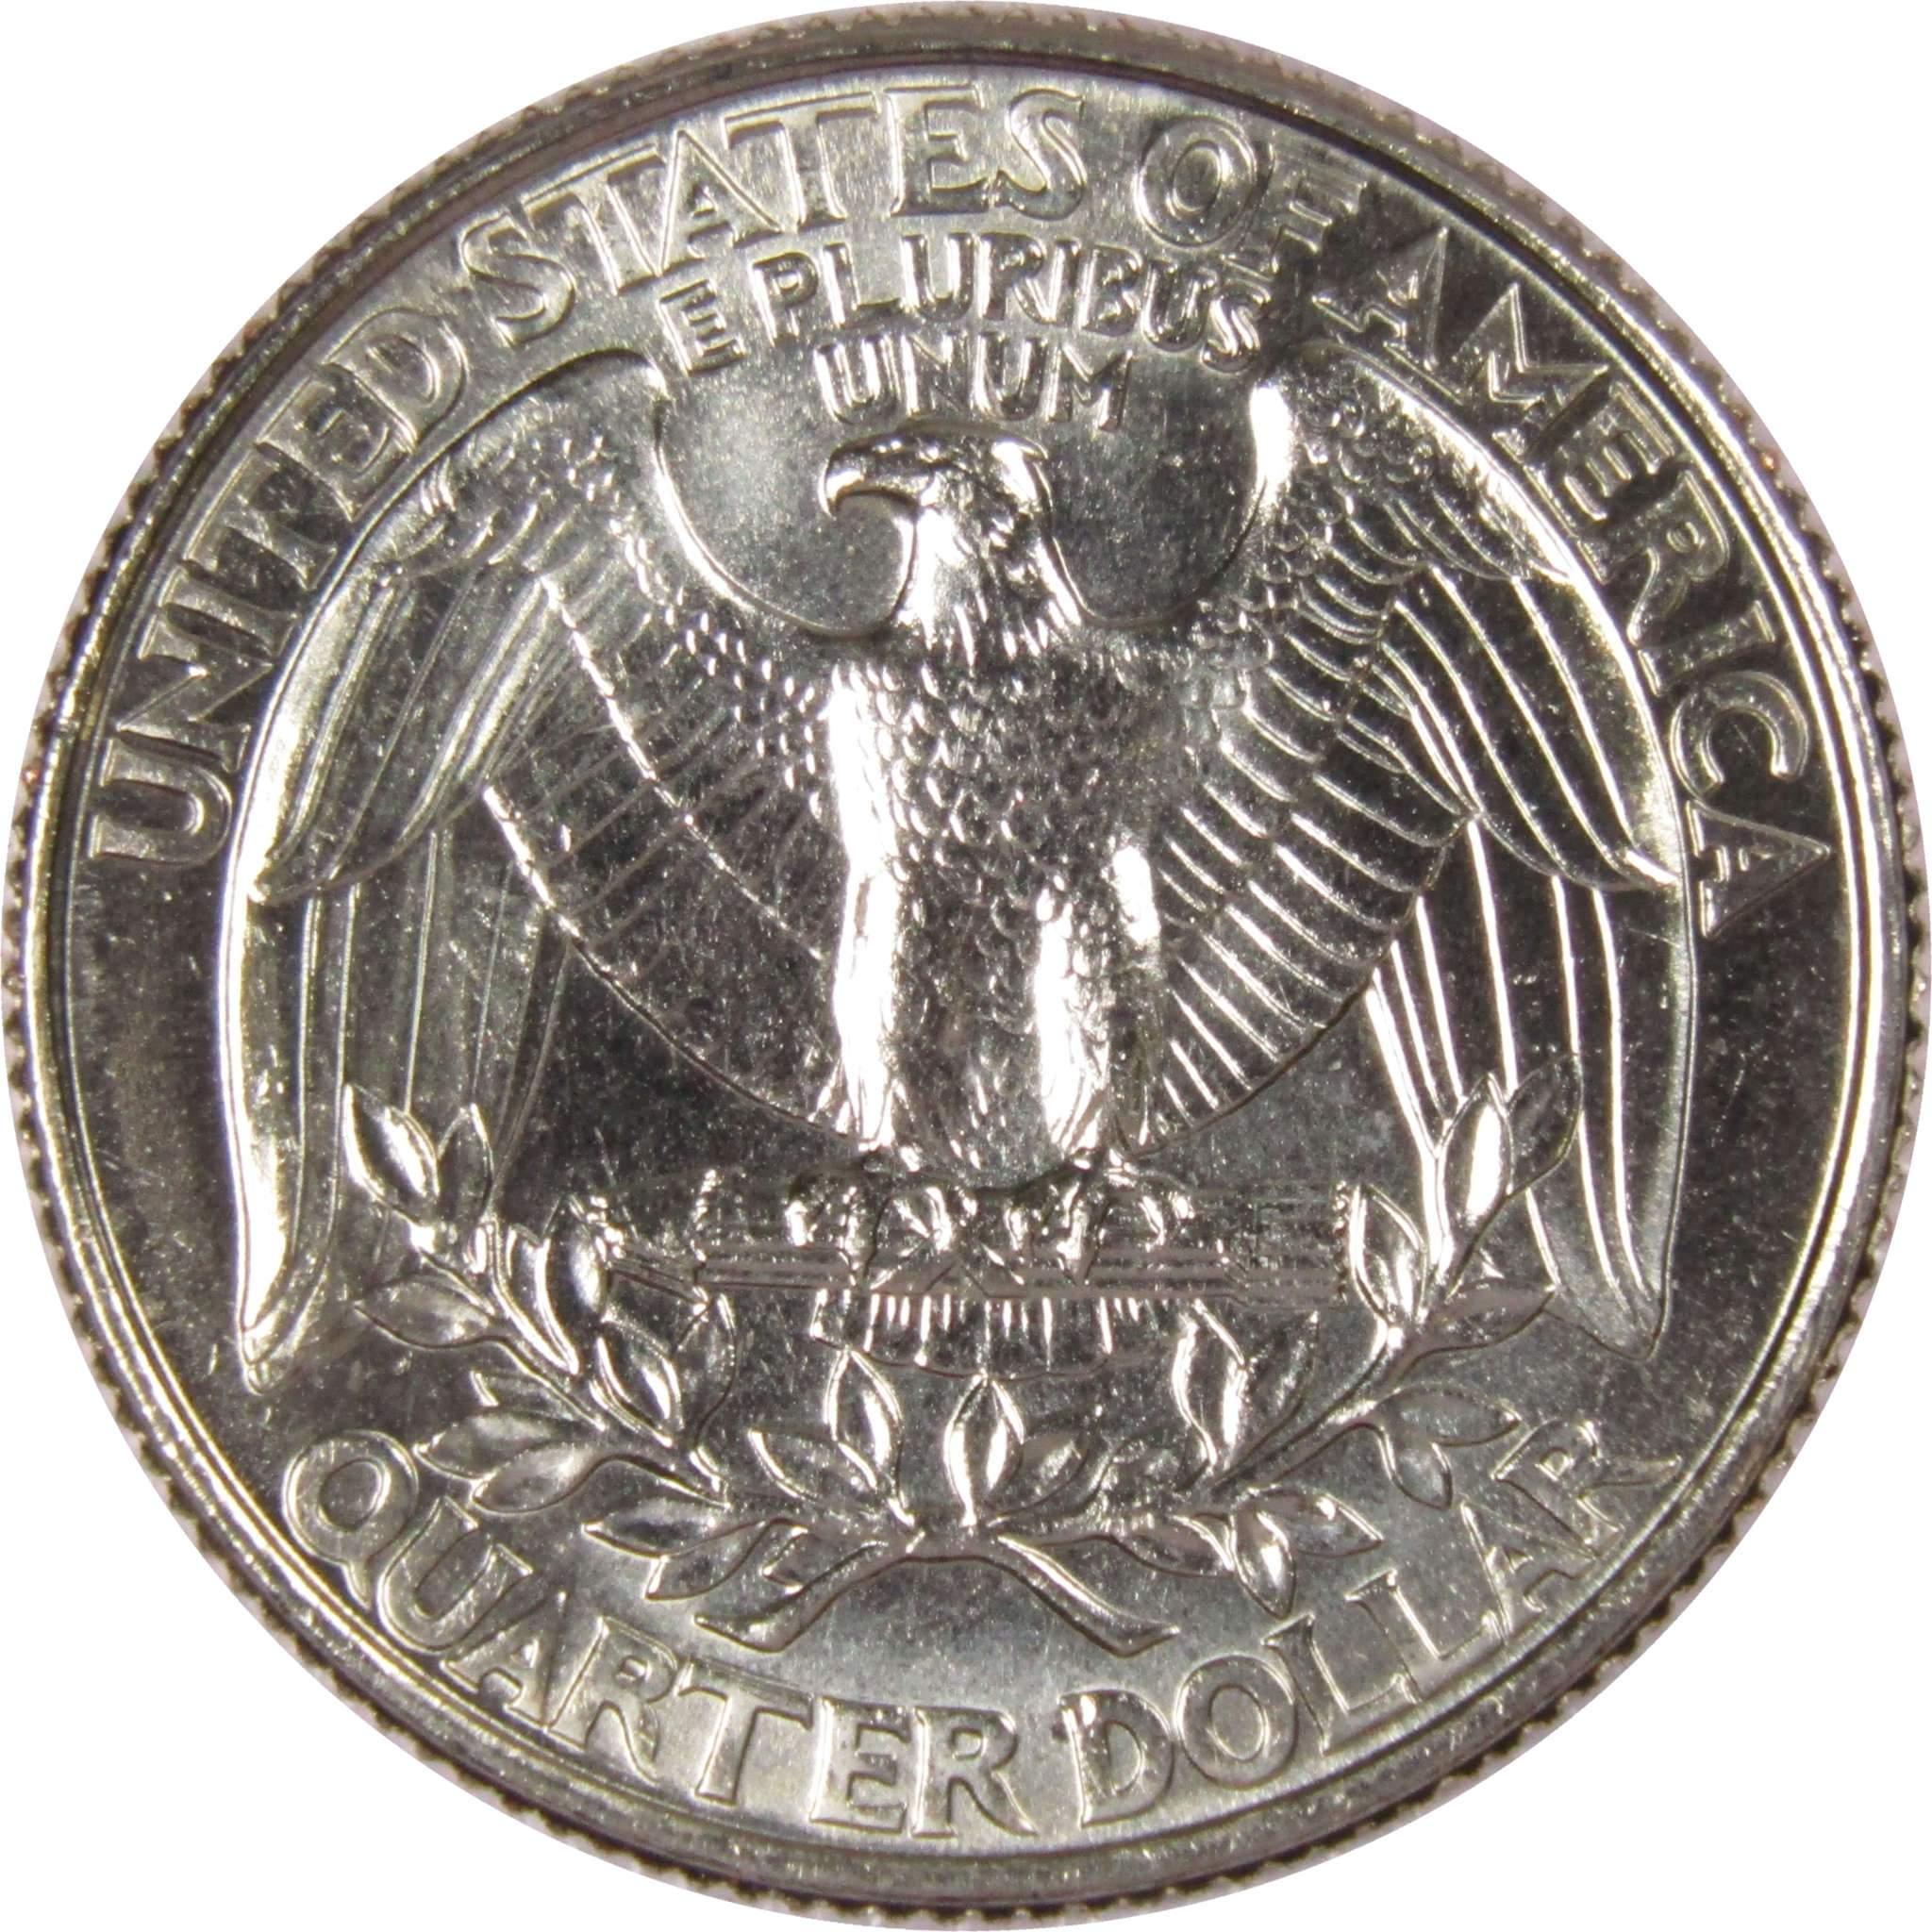 1993 D Washington Quarter BU Uncirculated Mint State 25c US Coin Collectible